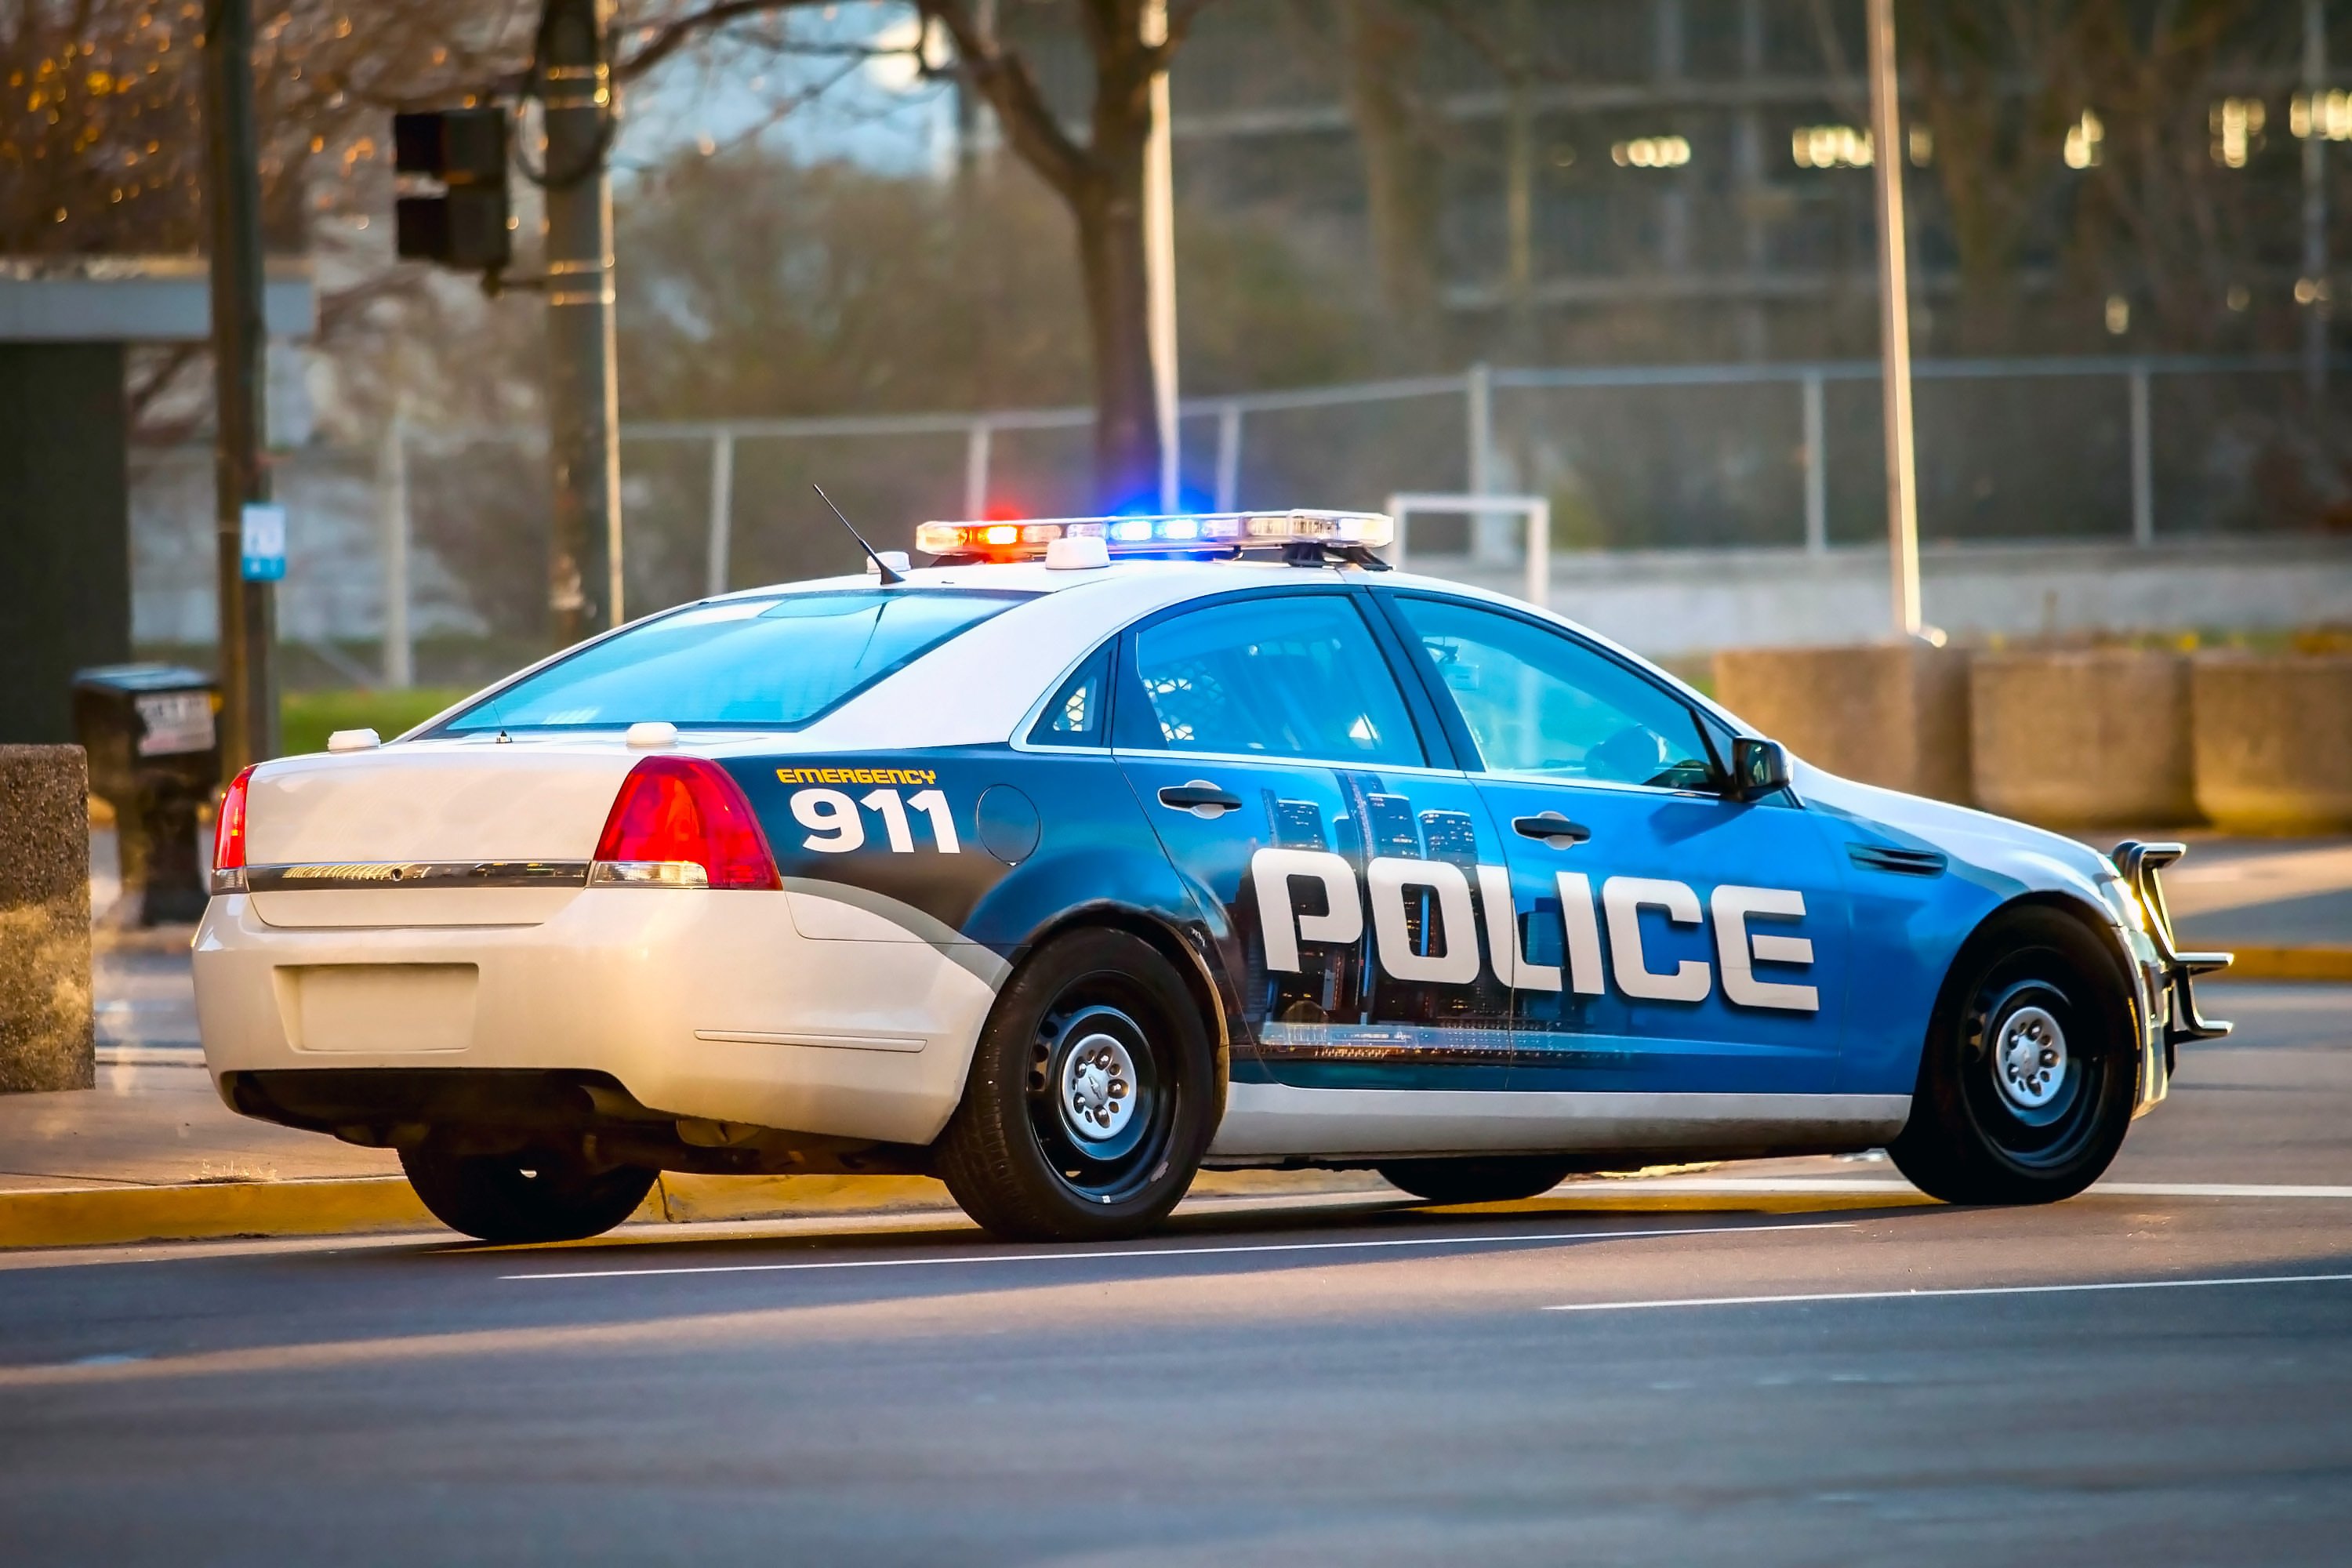 A blue police car speeds into action. | Photo: Shutterstock